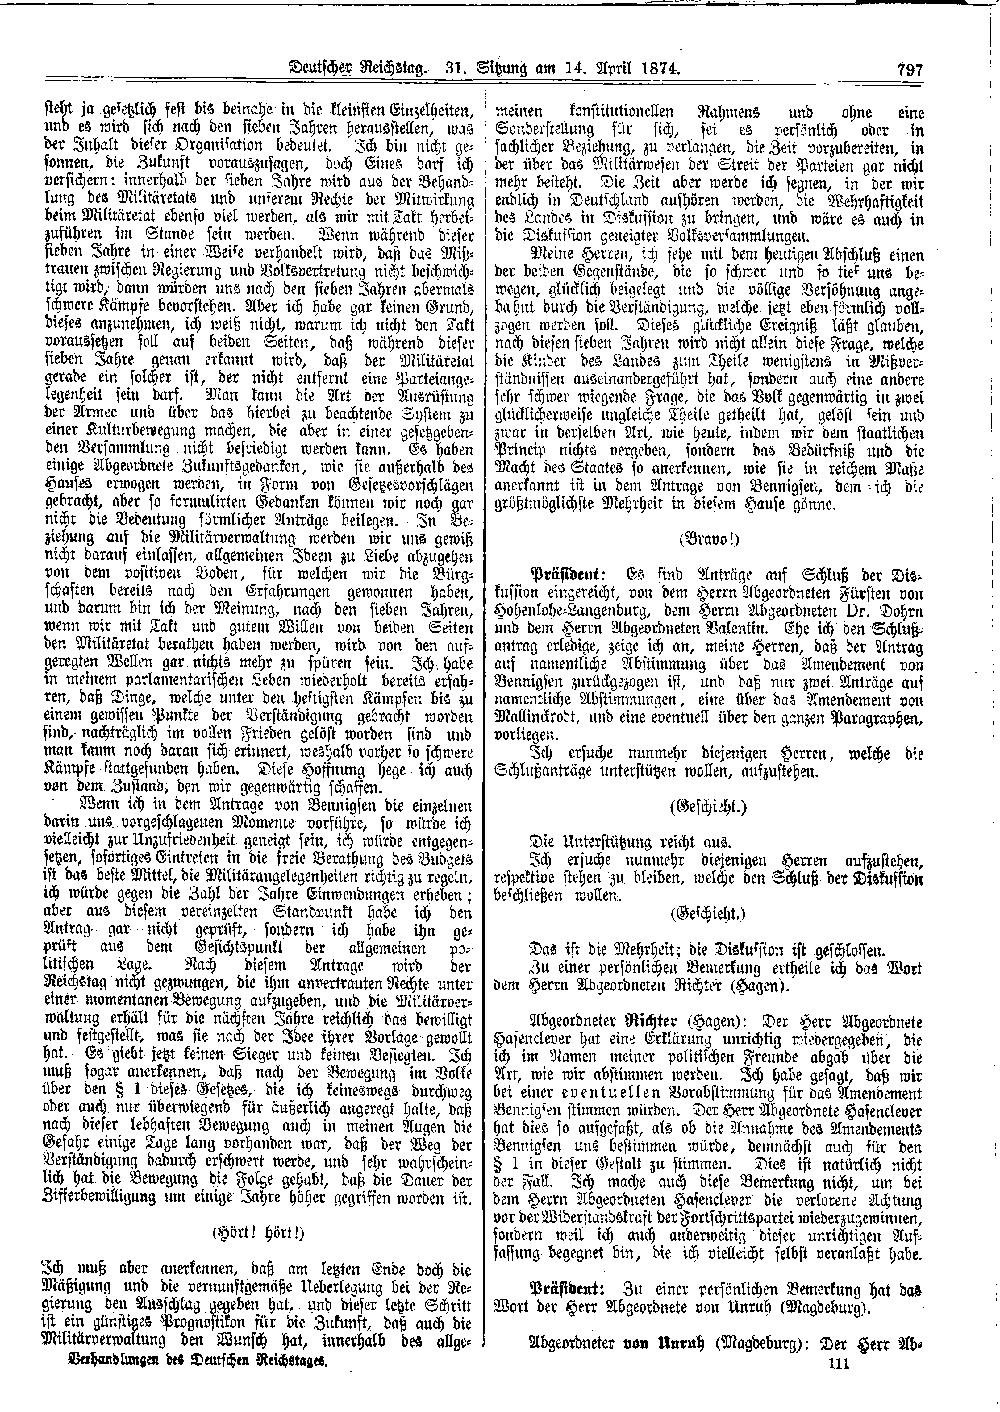 Scan of page 797